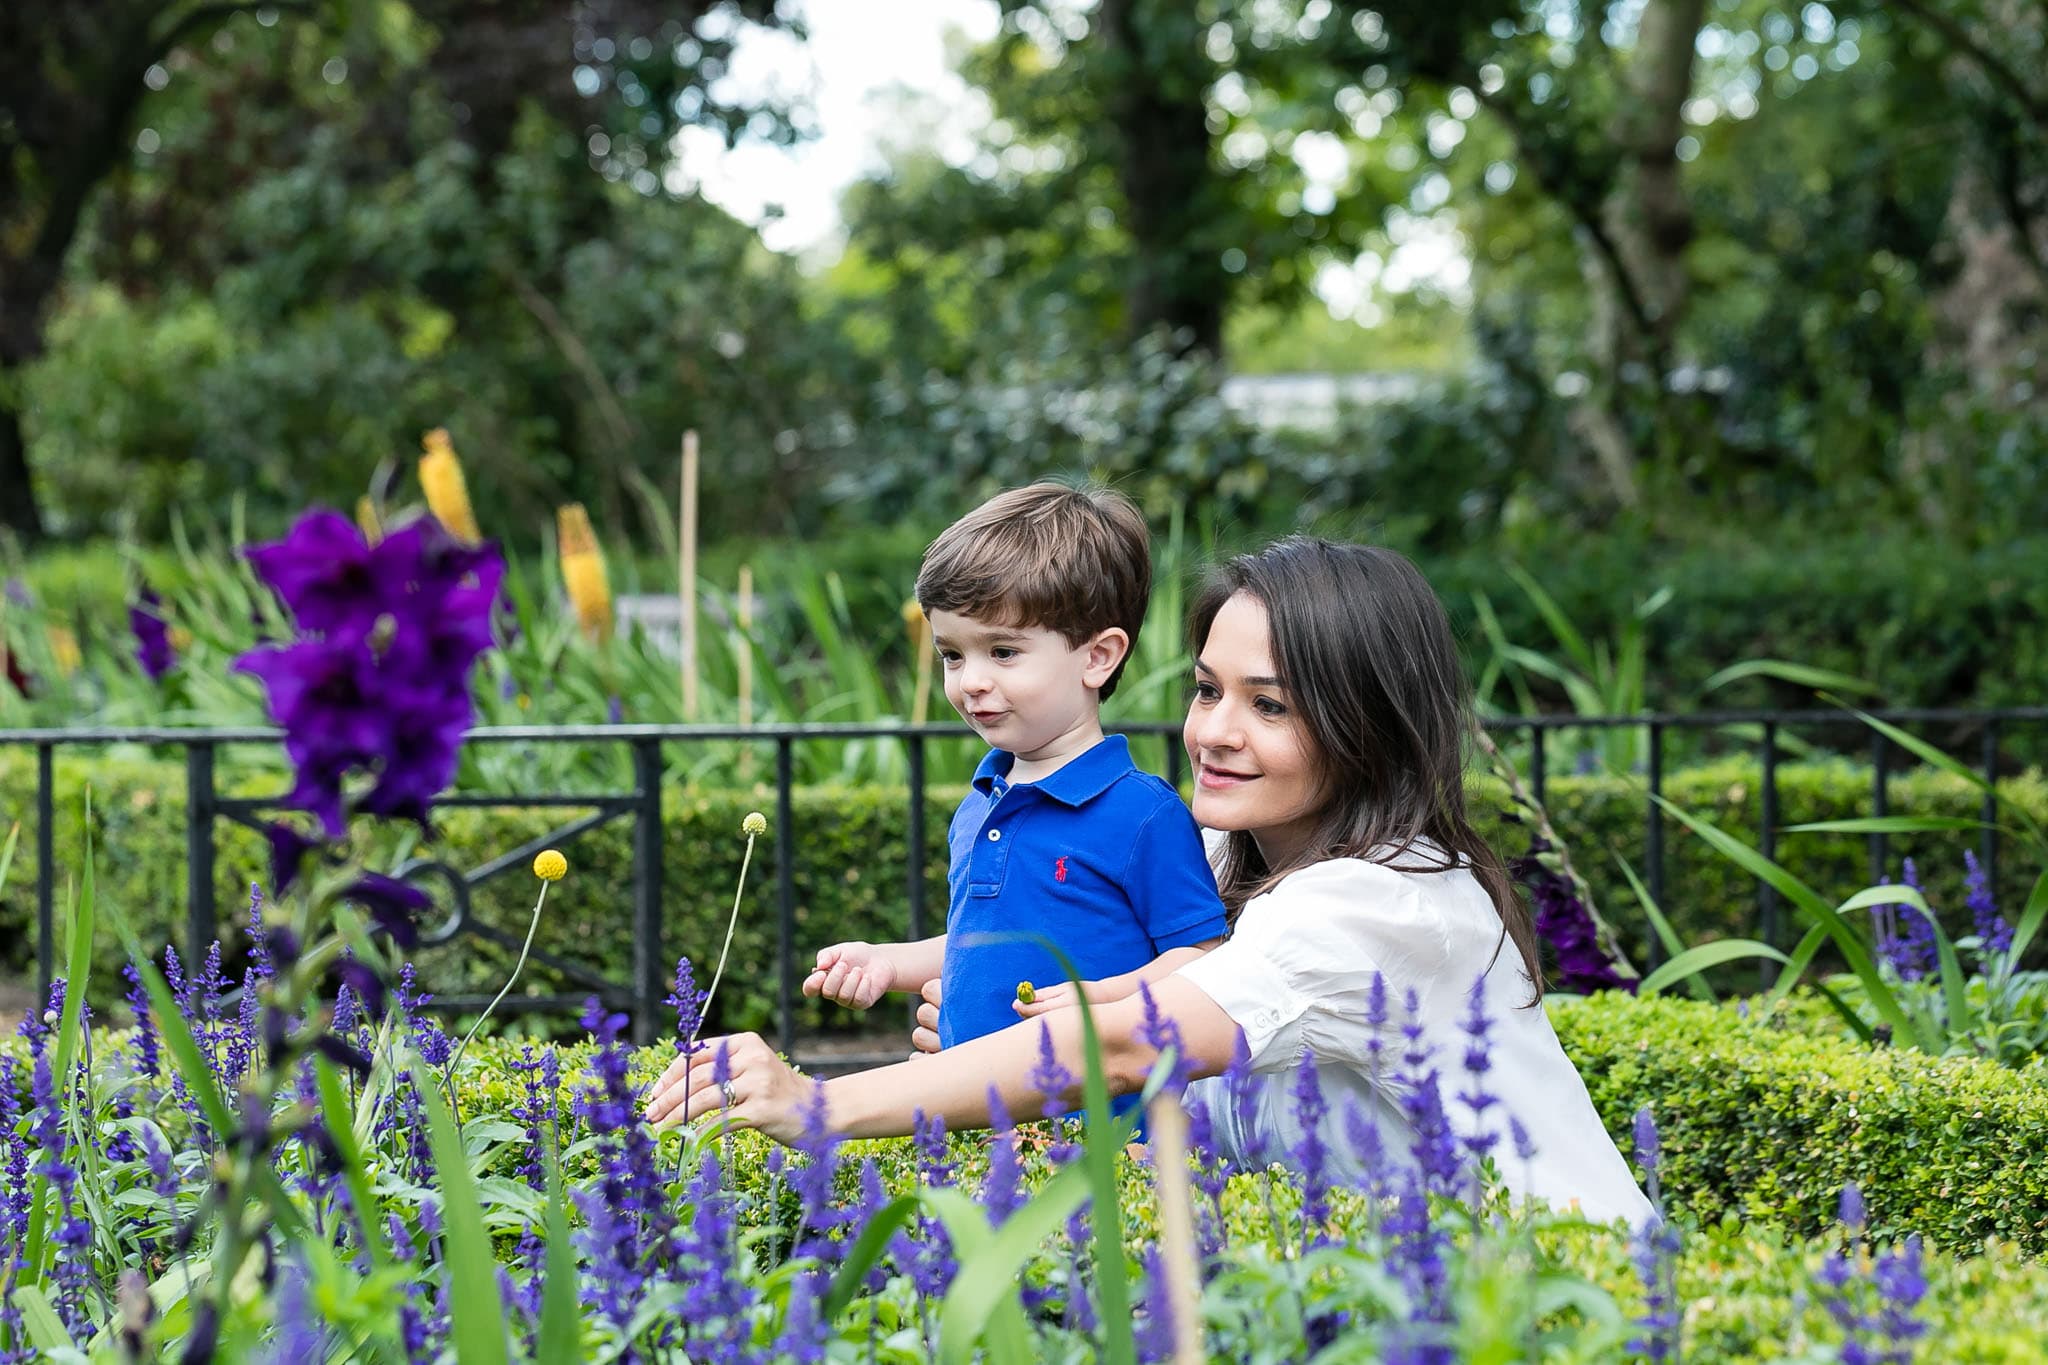 1667417736 992 Which Parks Work Best for Family Photography in London